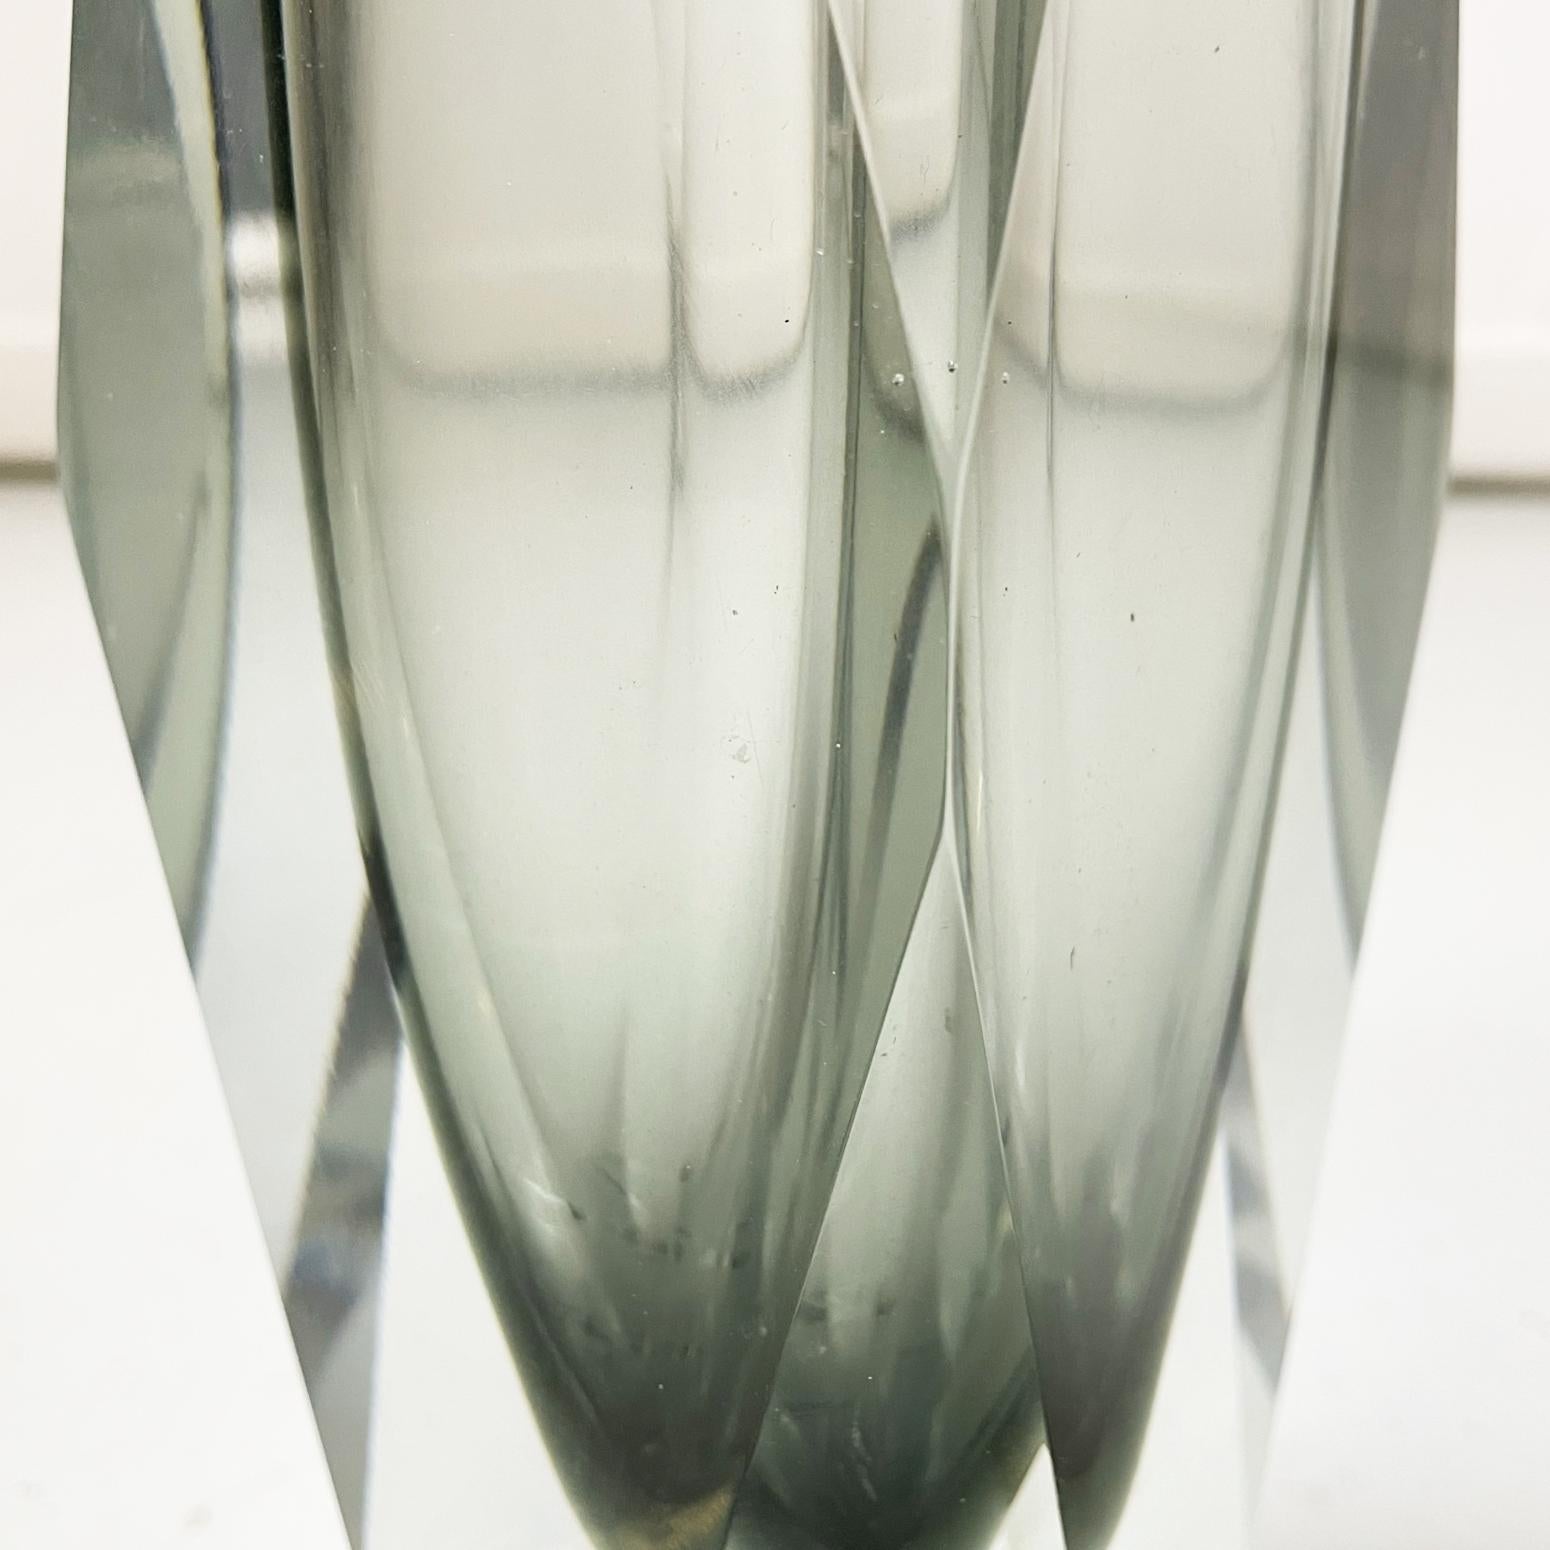 Italian Modern Vase in Grey Murano Glass from the I Sommersi Series, 1970s For Sale 3